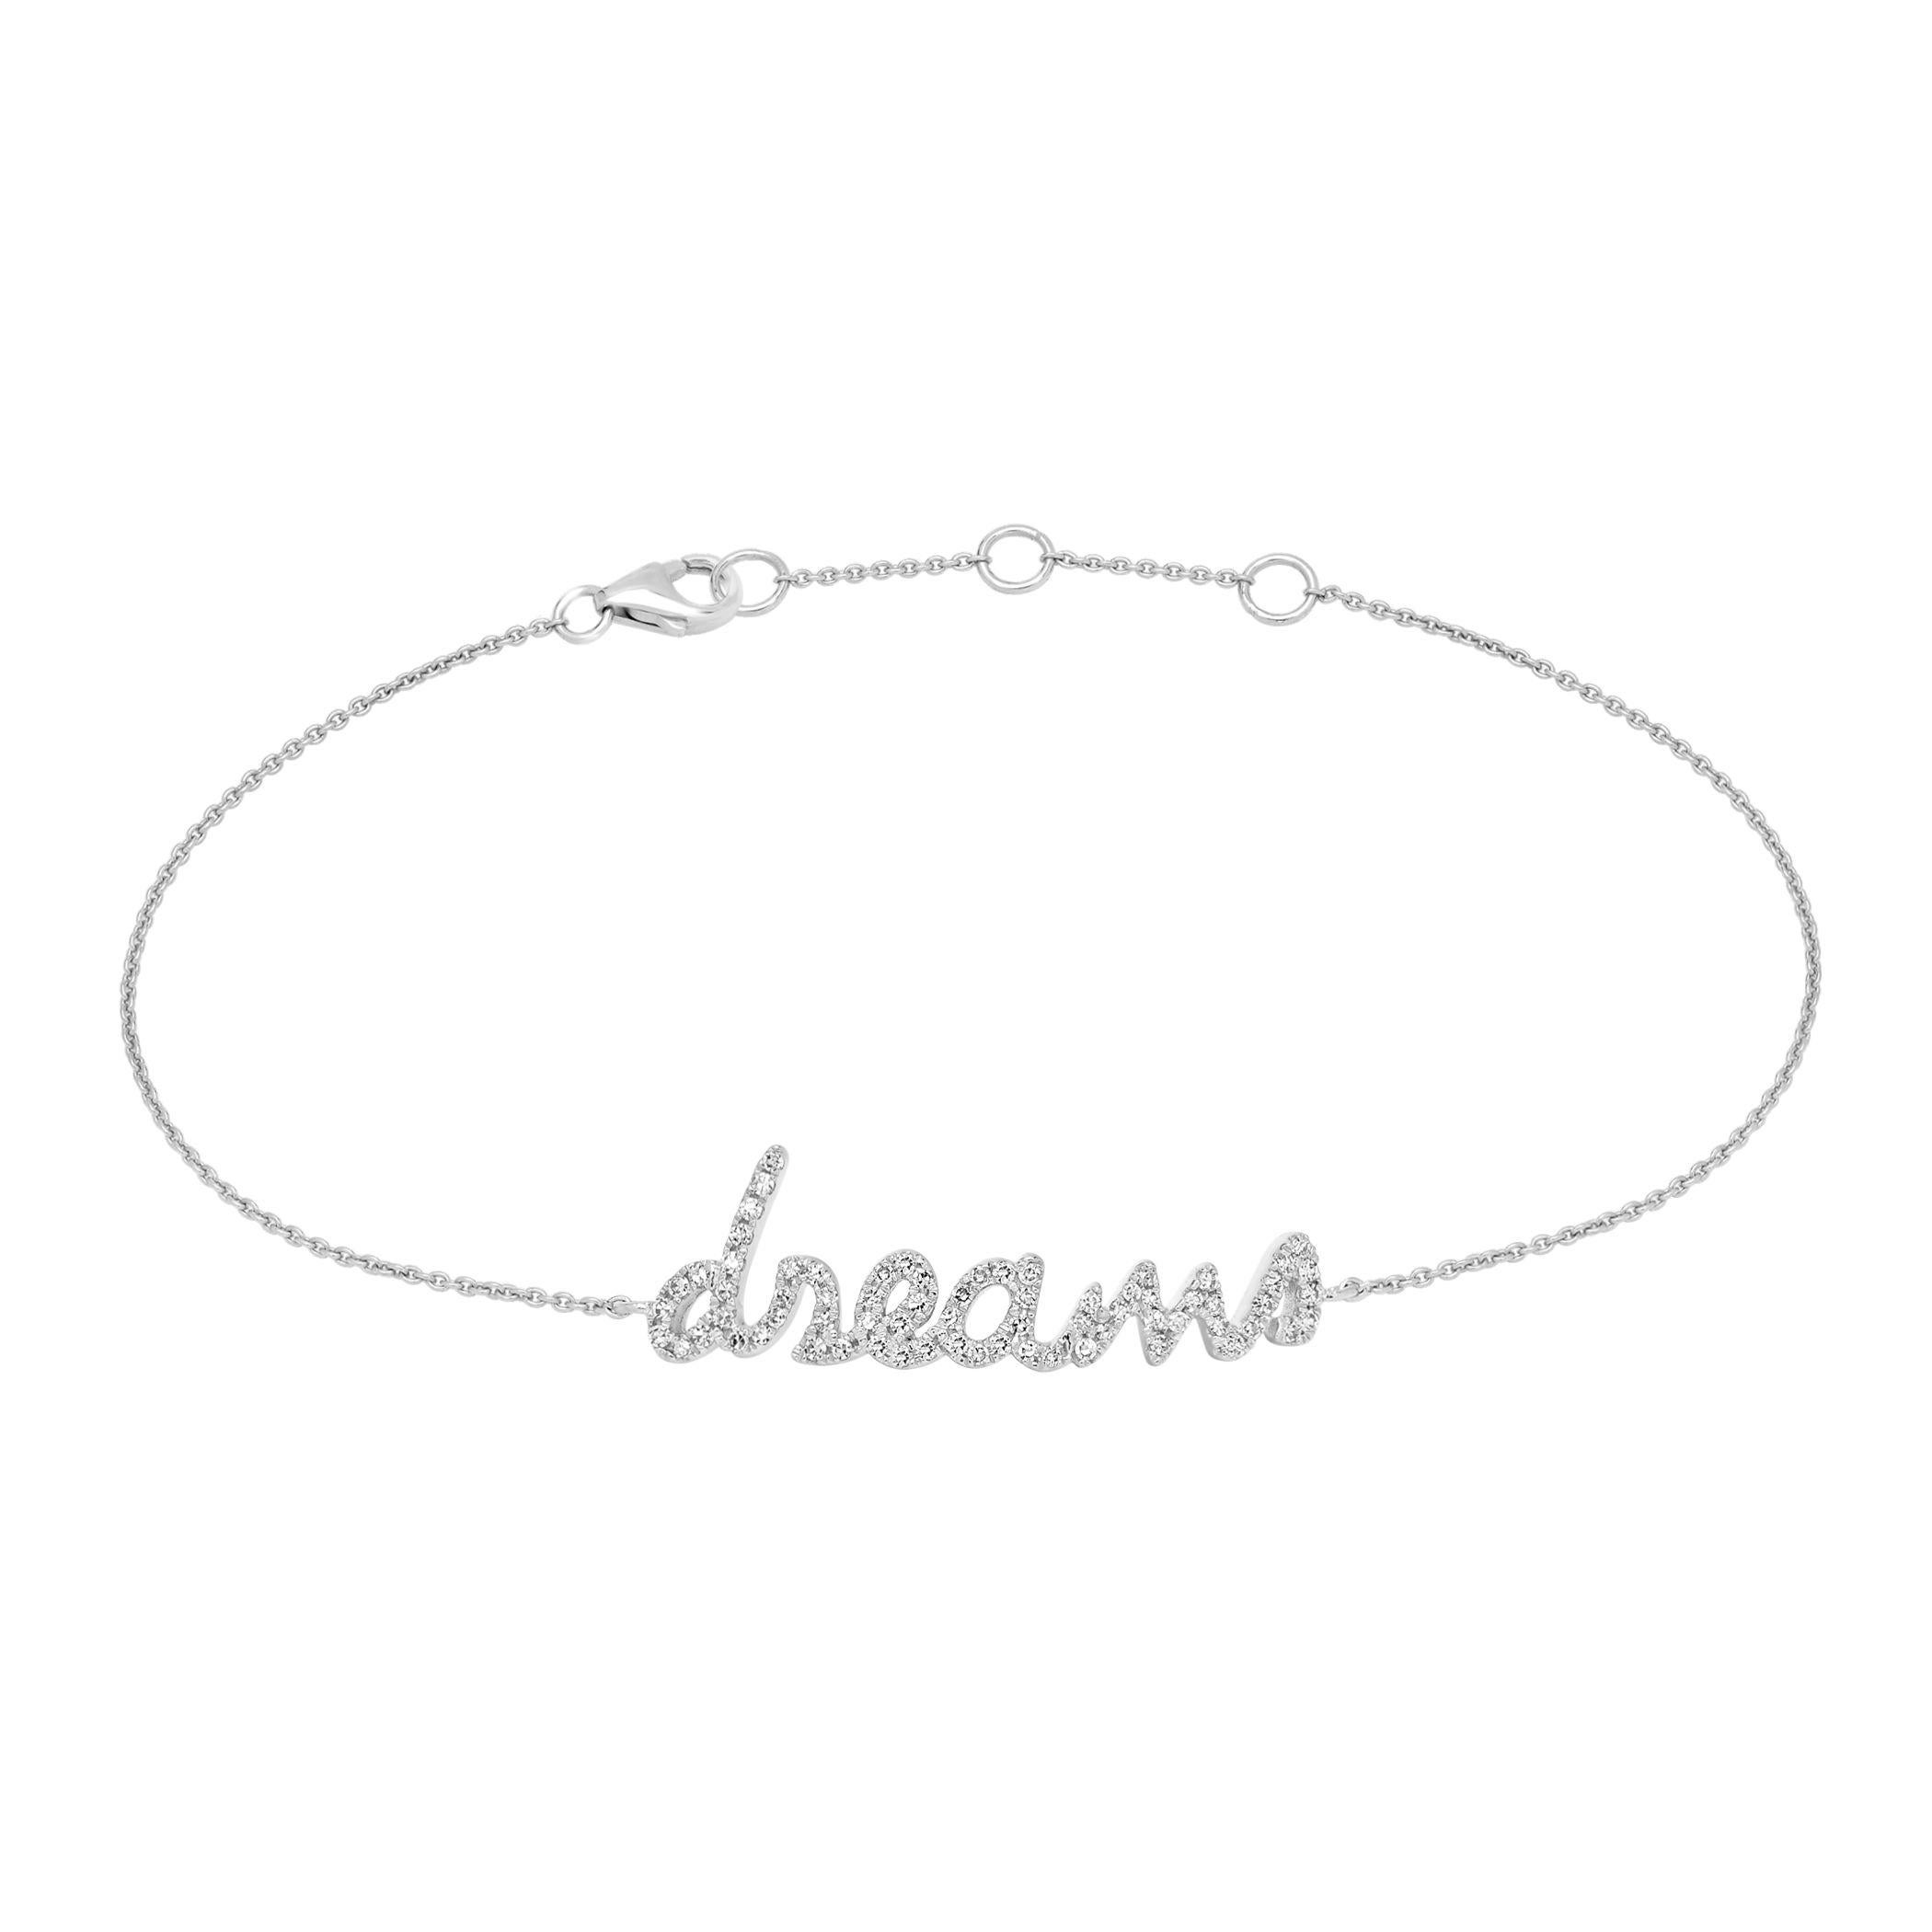 Let your dreams shine bright with this 14k white gold bracelet adorned with stunning diamonds by Luxle. This adjustable bracelet is made of 14k white gold and features 0.20 carats of round full-cut and single-cut diamonds. This bracelet has a